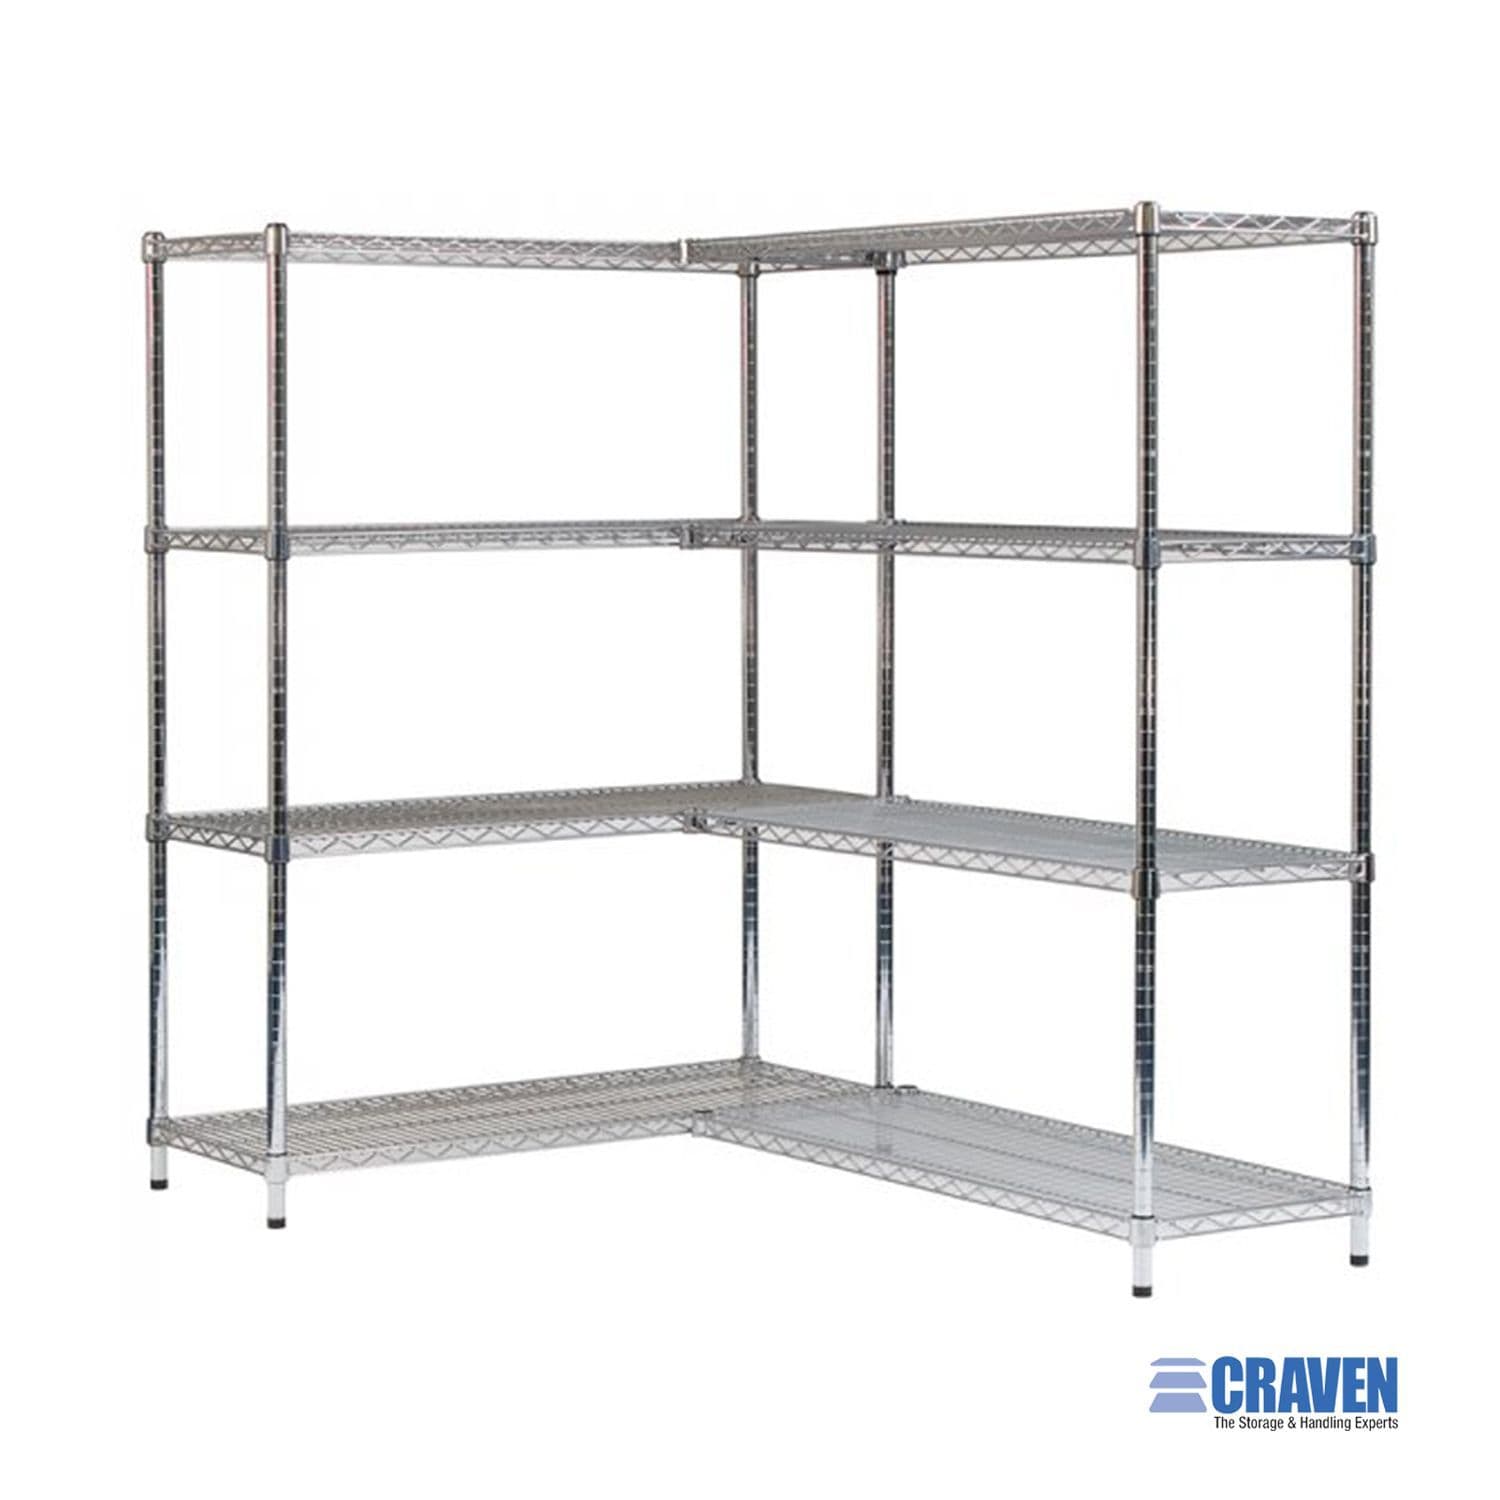 Craven 3 Tier Chrome Wire Shelving 1200mm (W) JD Catering Equipment Solutions Ltd